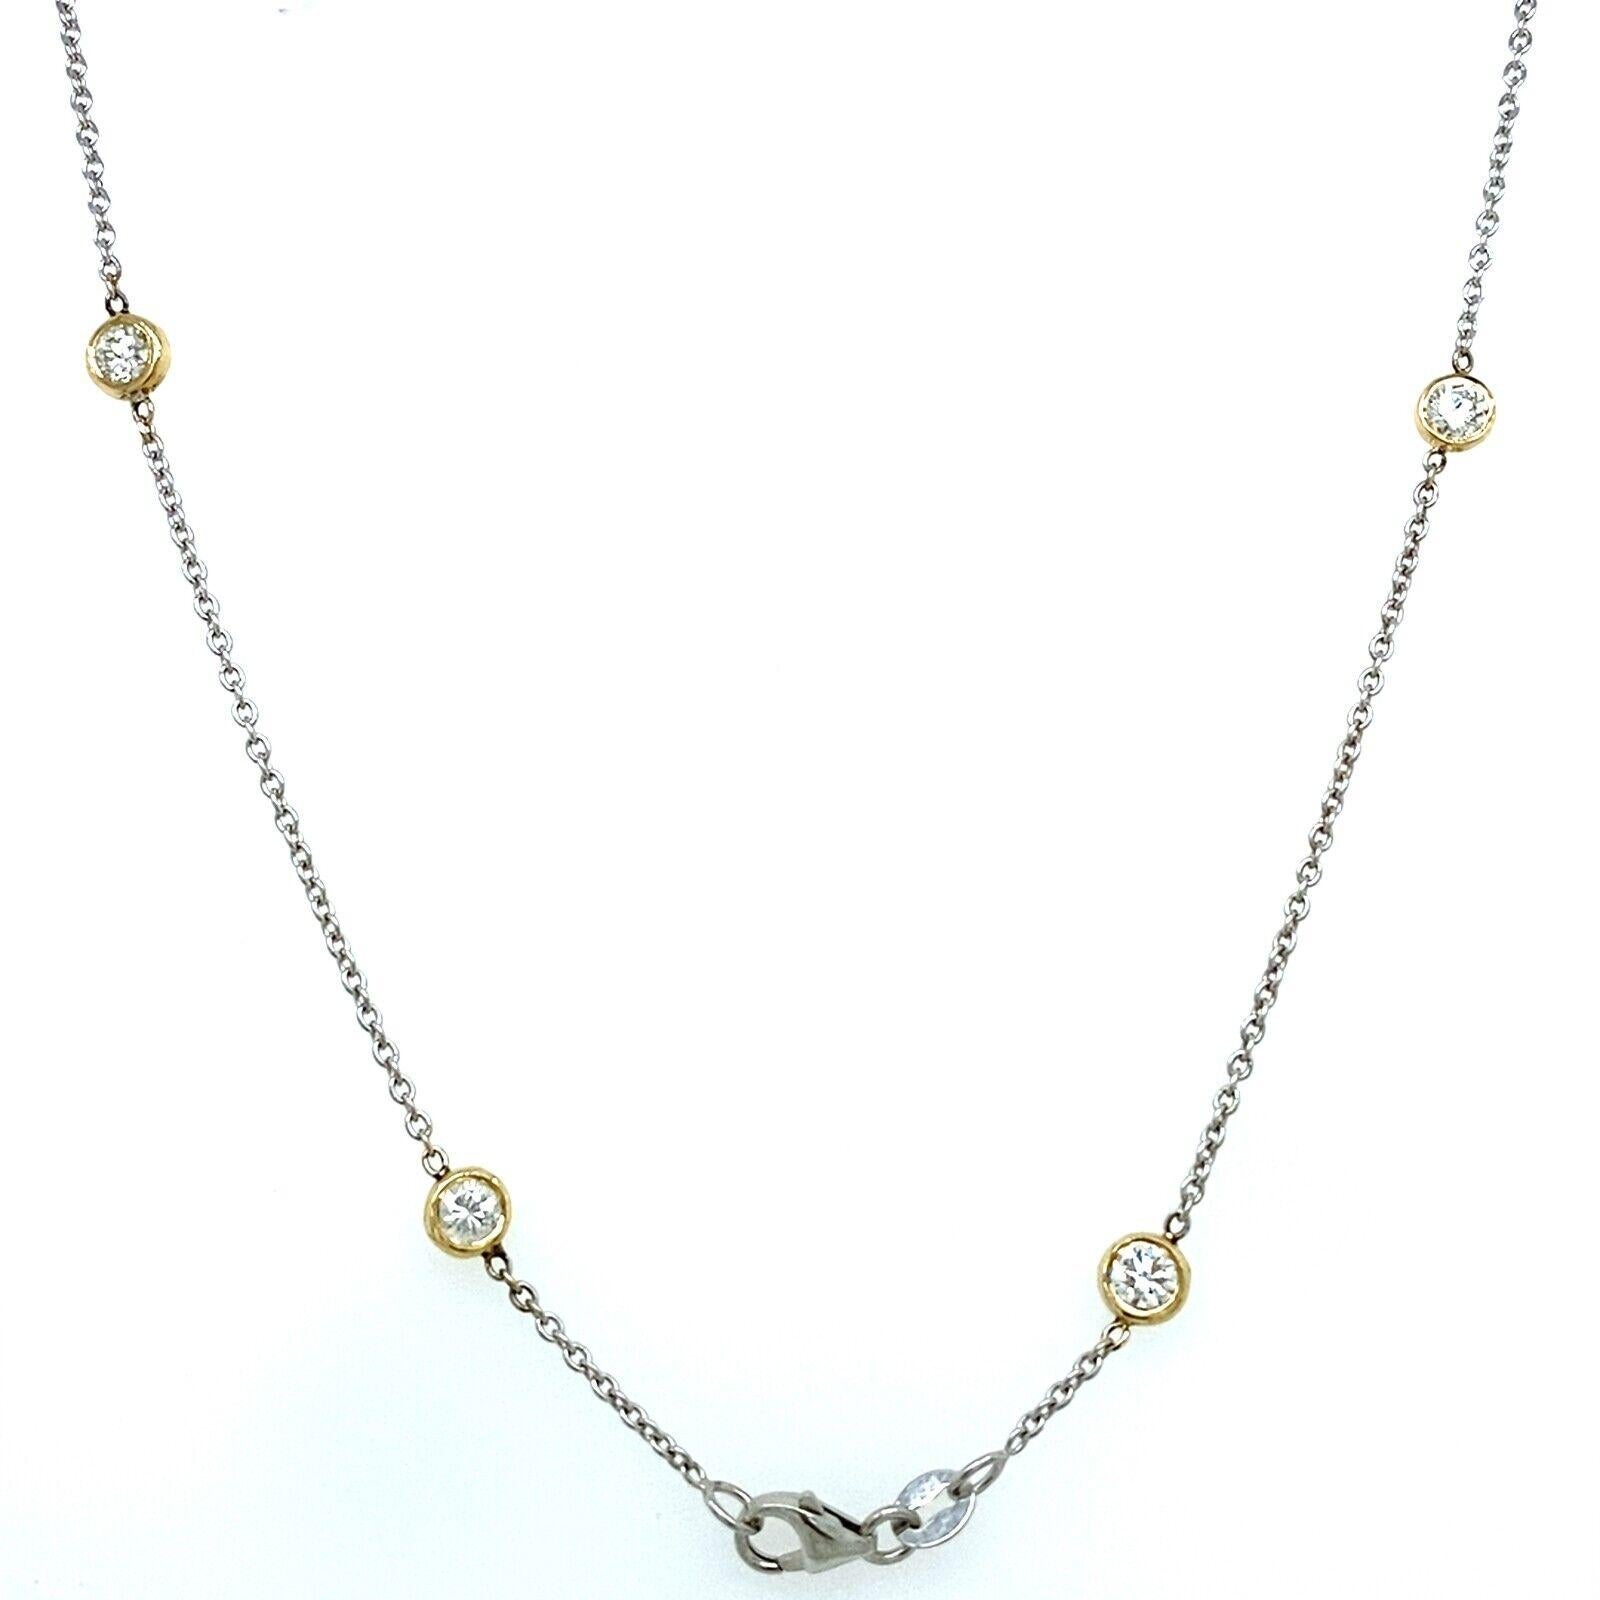 A timeless piece, this 10-stone rubover necklace set in 14ct White Gold chain and 18ct Yellow Gold rubover settings is a classic design with a modern twist. A total of 1.60ct G/H SI Diamonds are set in a 10-stone rubover setting. This necklace is